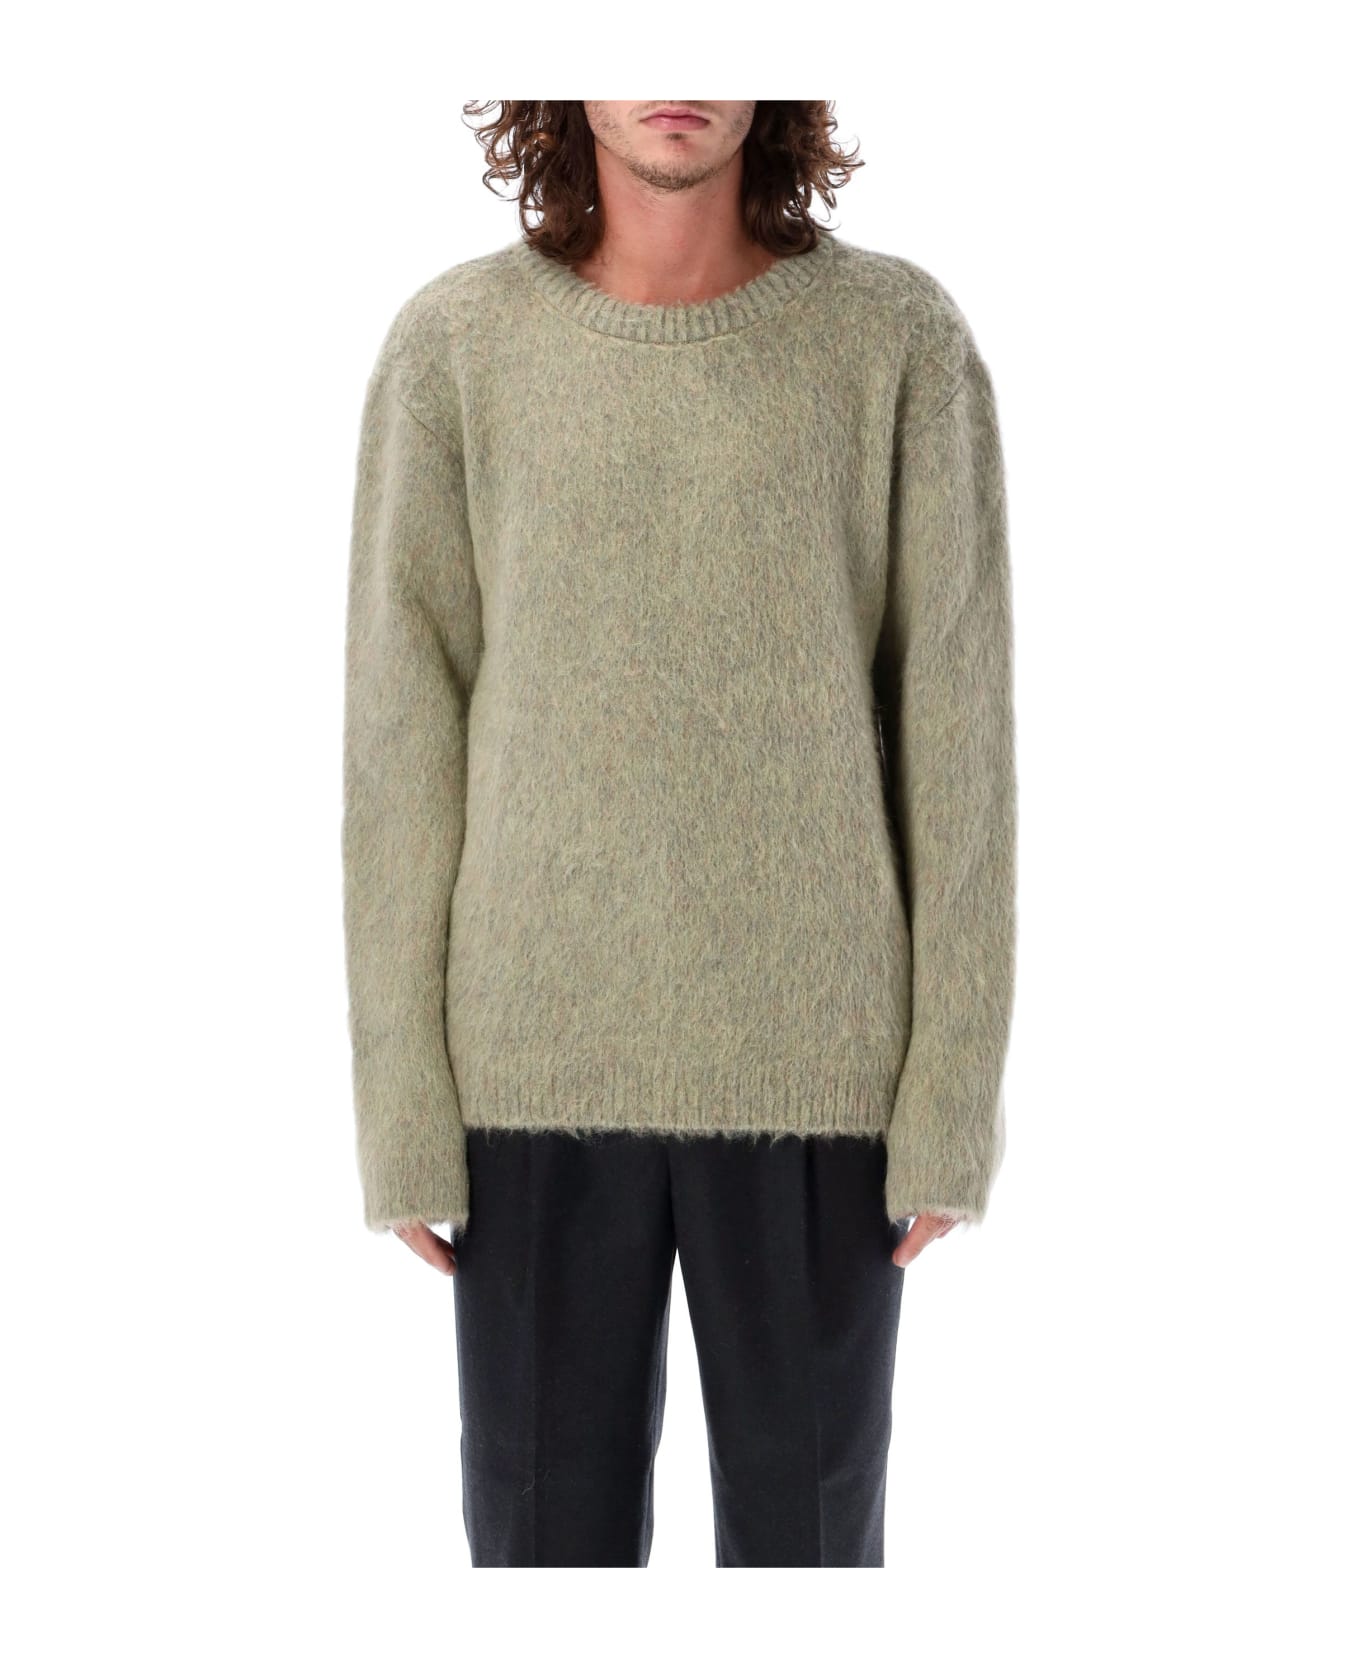 Lemaire Brushed Sweater - GREY